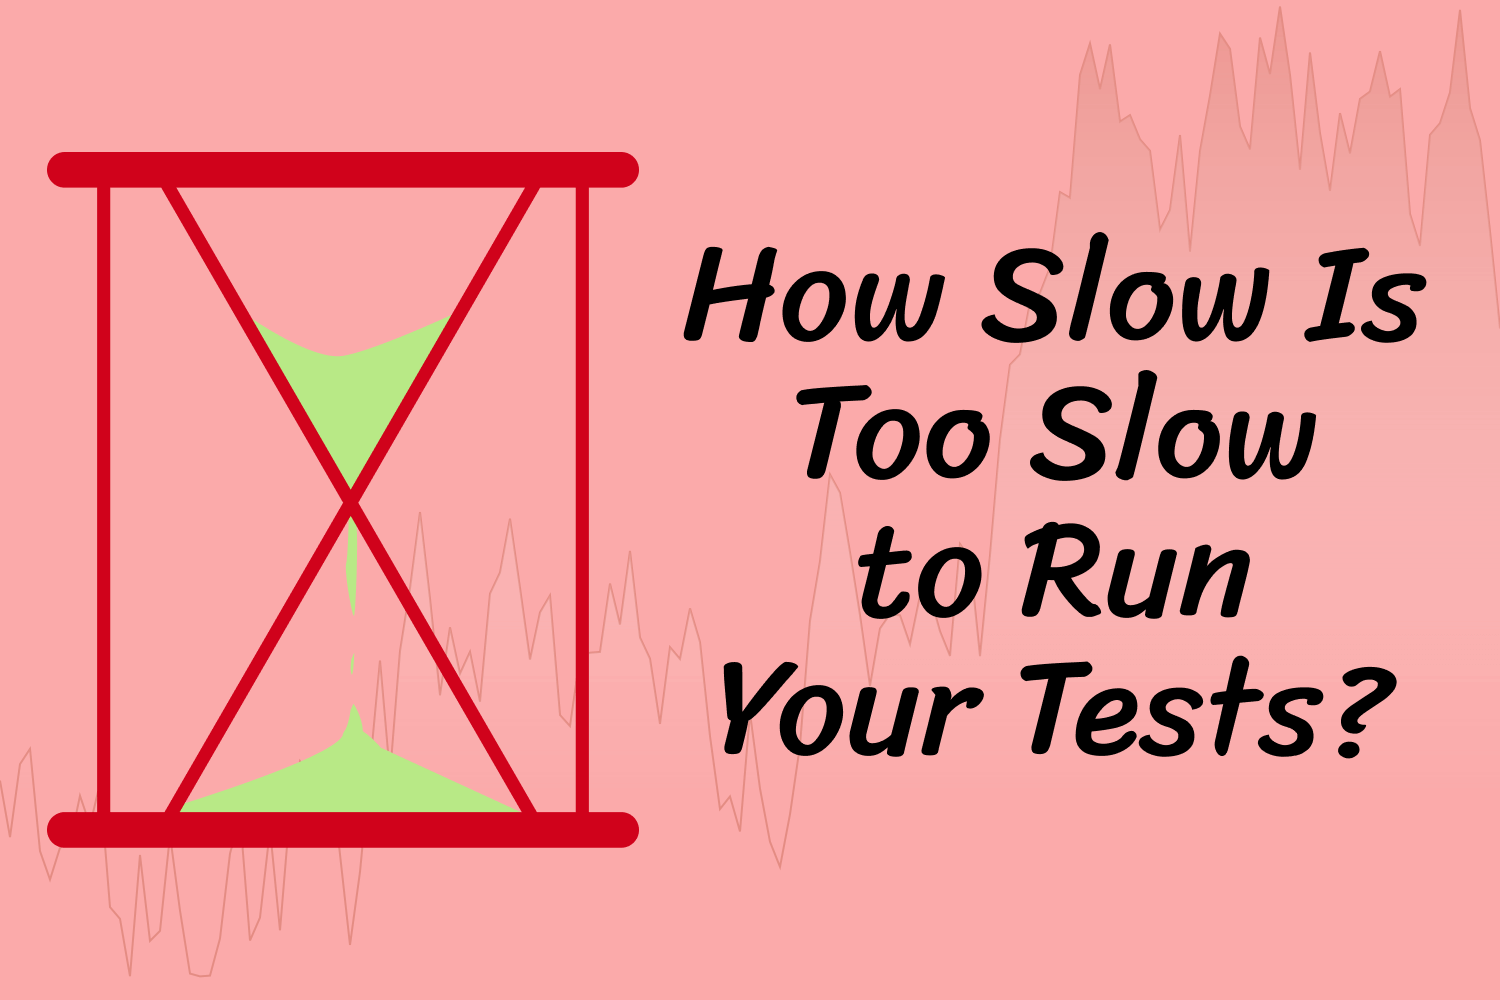 How Slow Is Too Slow to Run Your Tests?